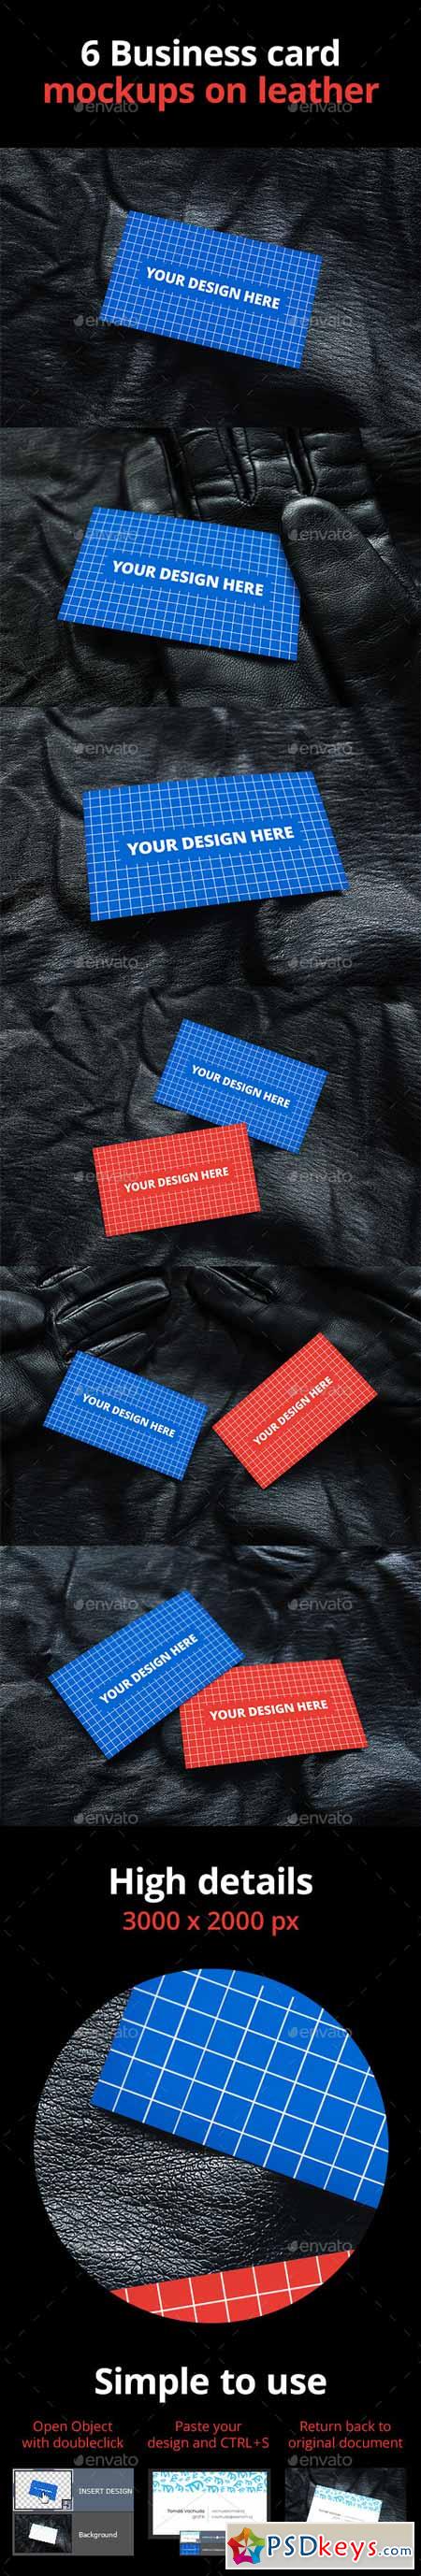 6 Business Card Mockups on Leather 11100322